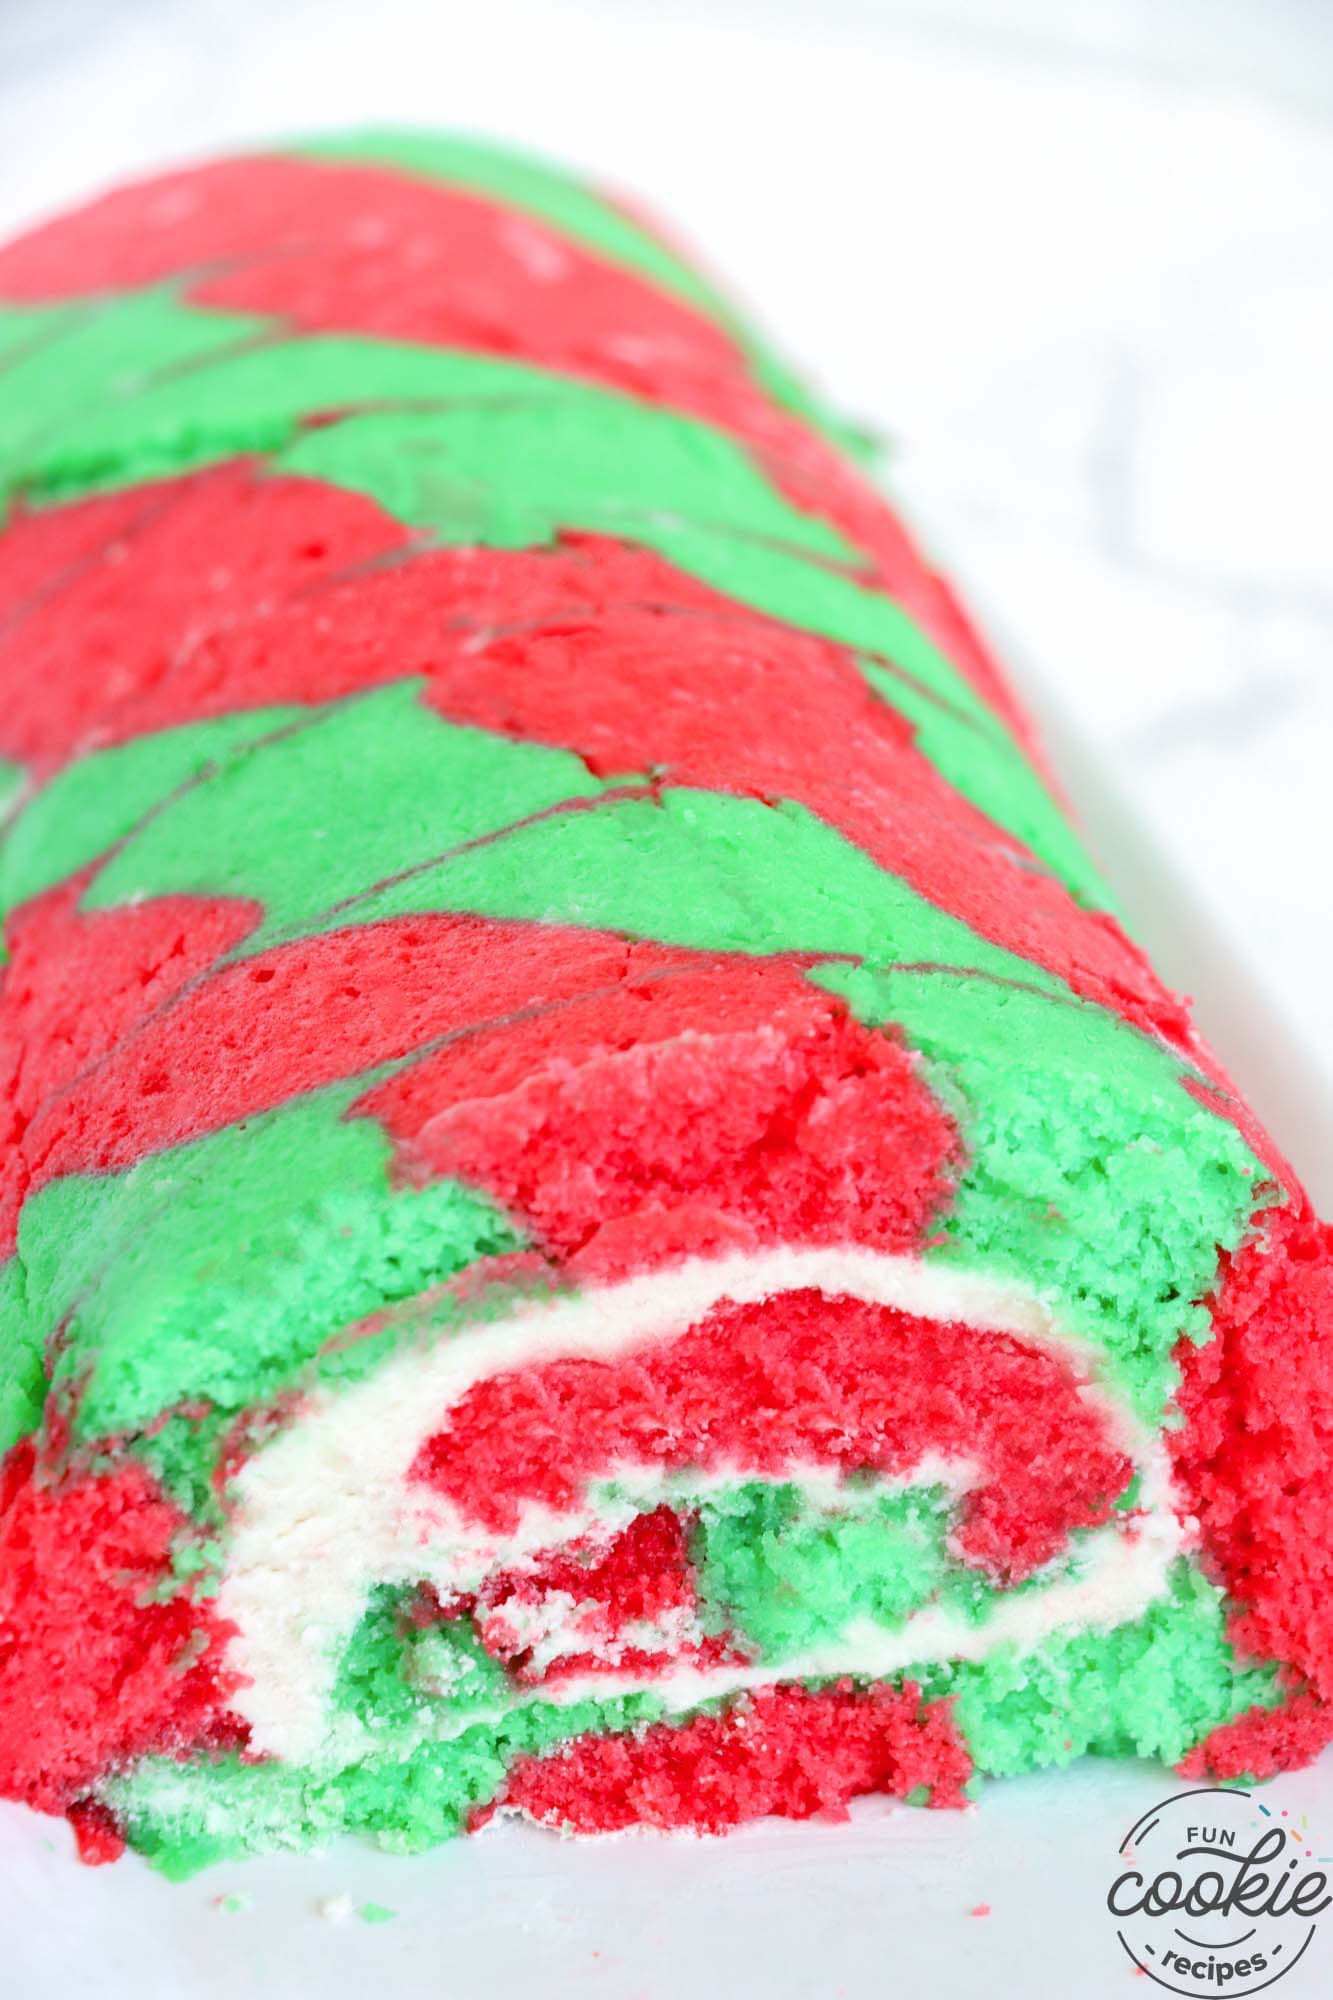 A red and green christmas cake roll before slicing